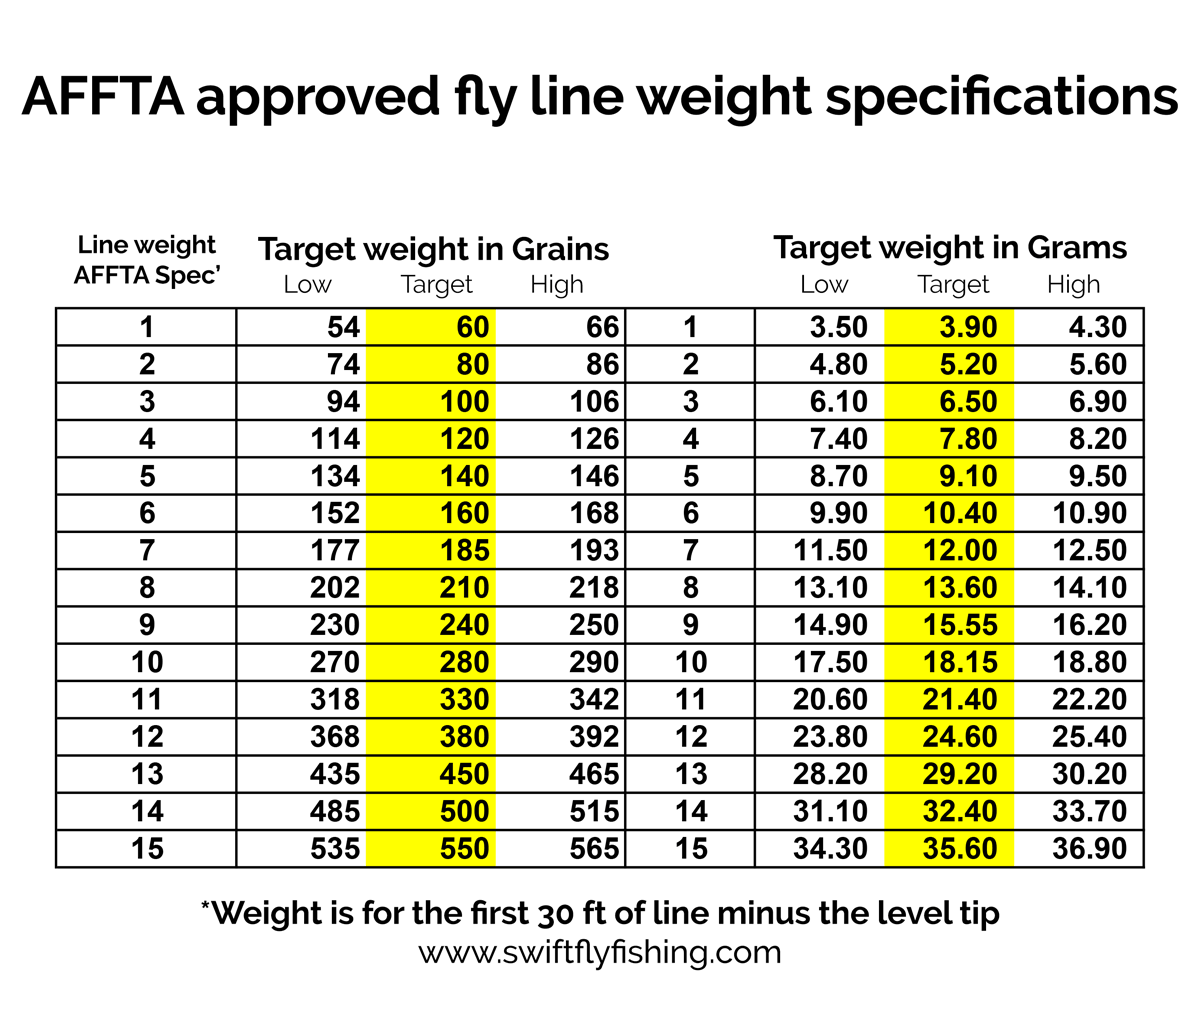 https://cdn.shopify.com/s/files/1/0120/5852/files/fly_line_weight_specs.png?v=1473658052